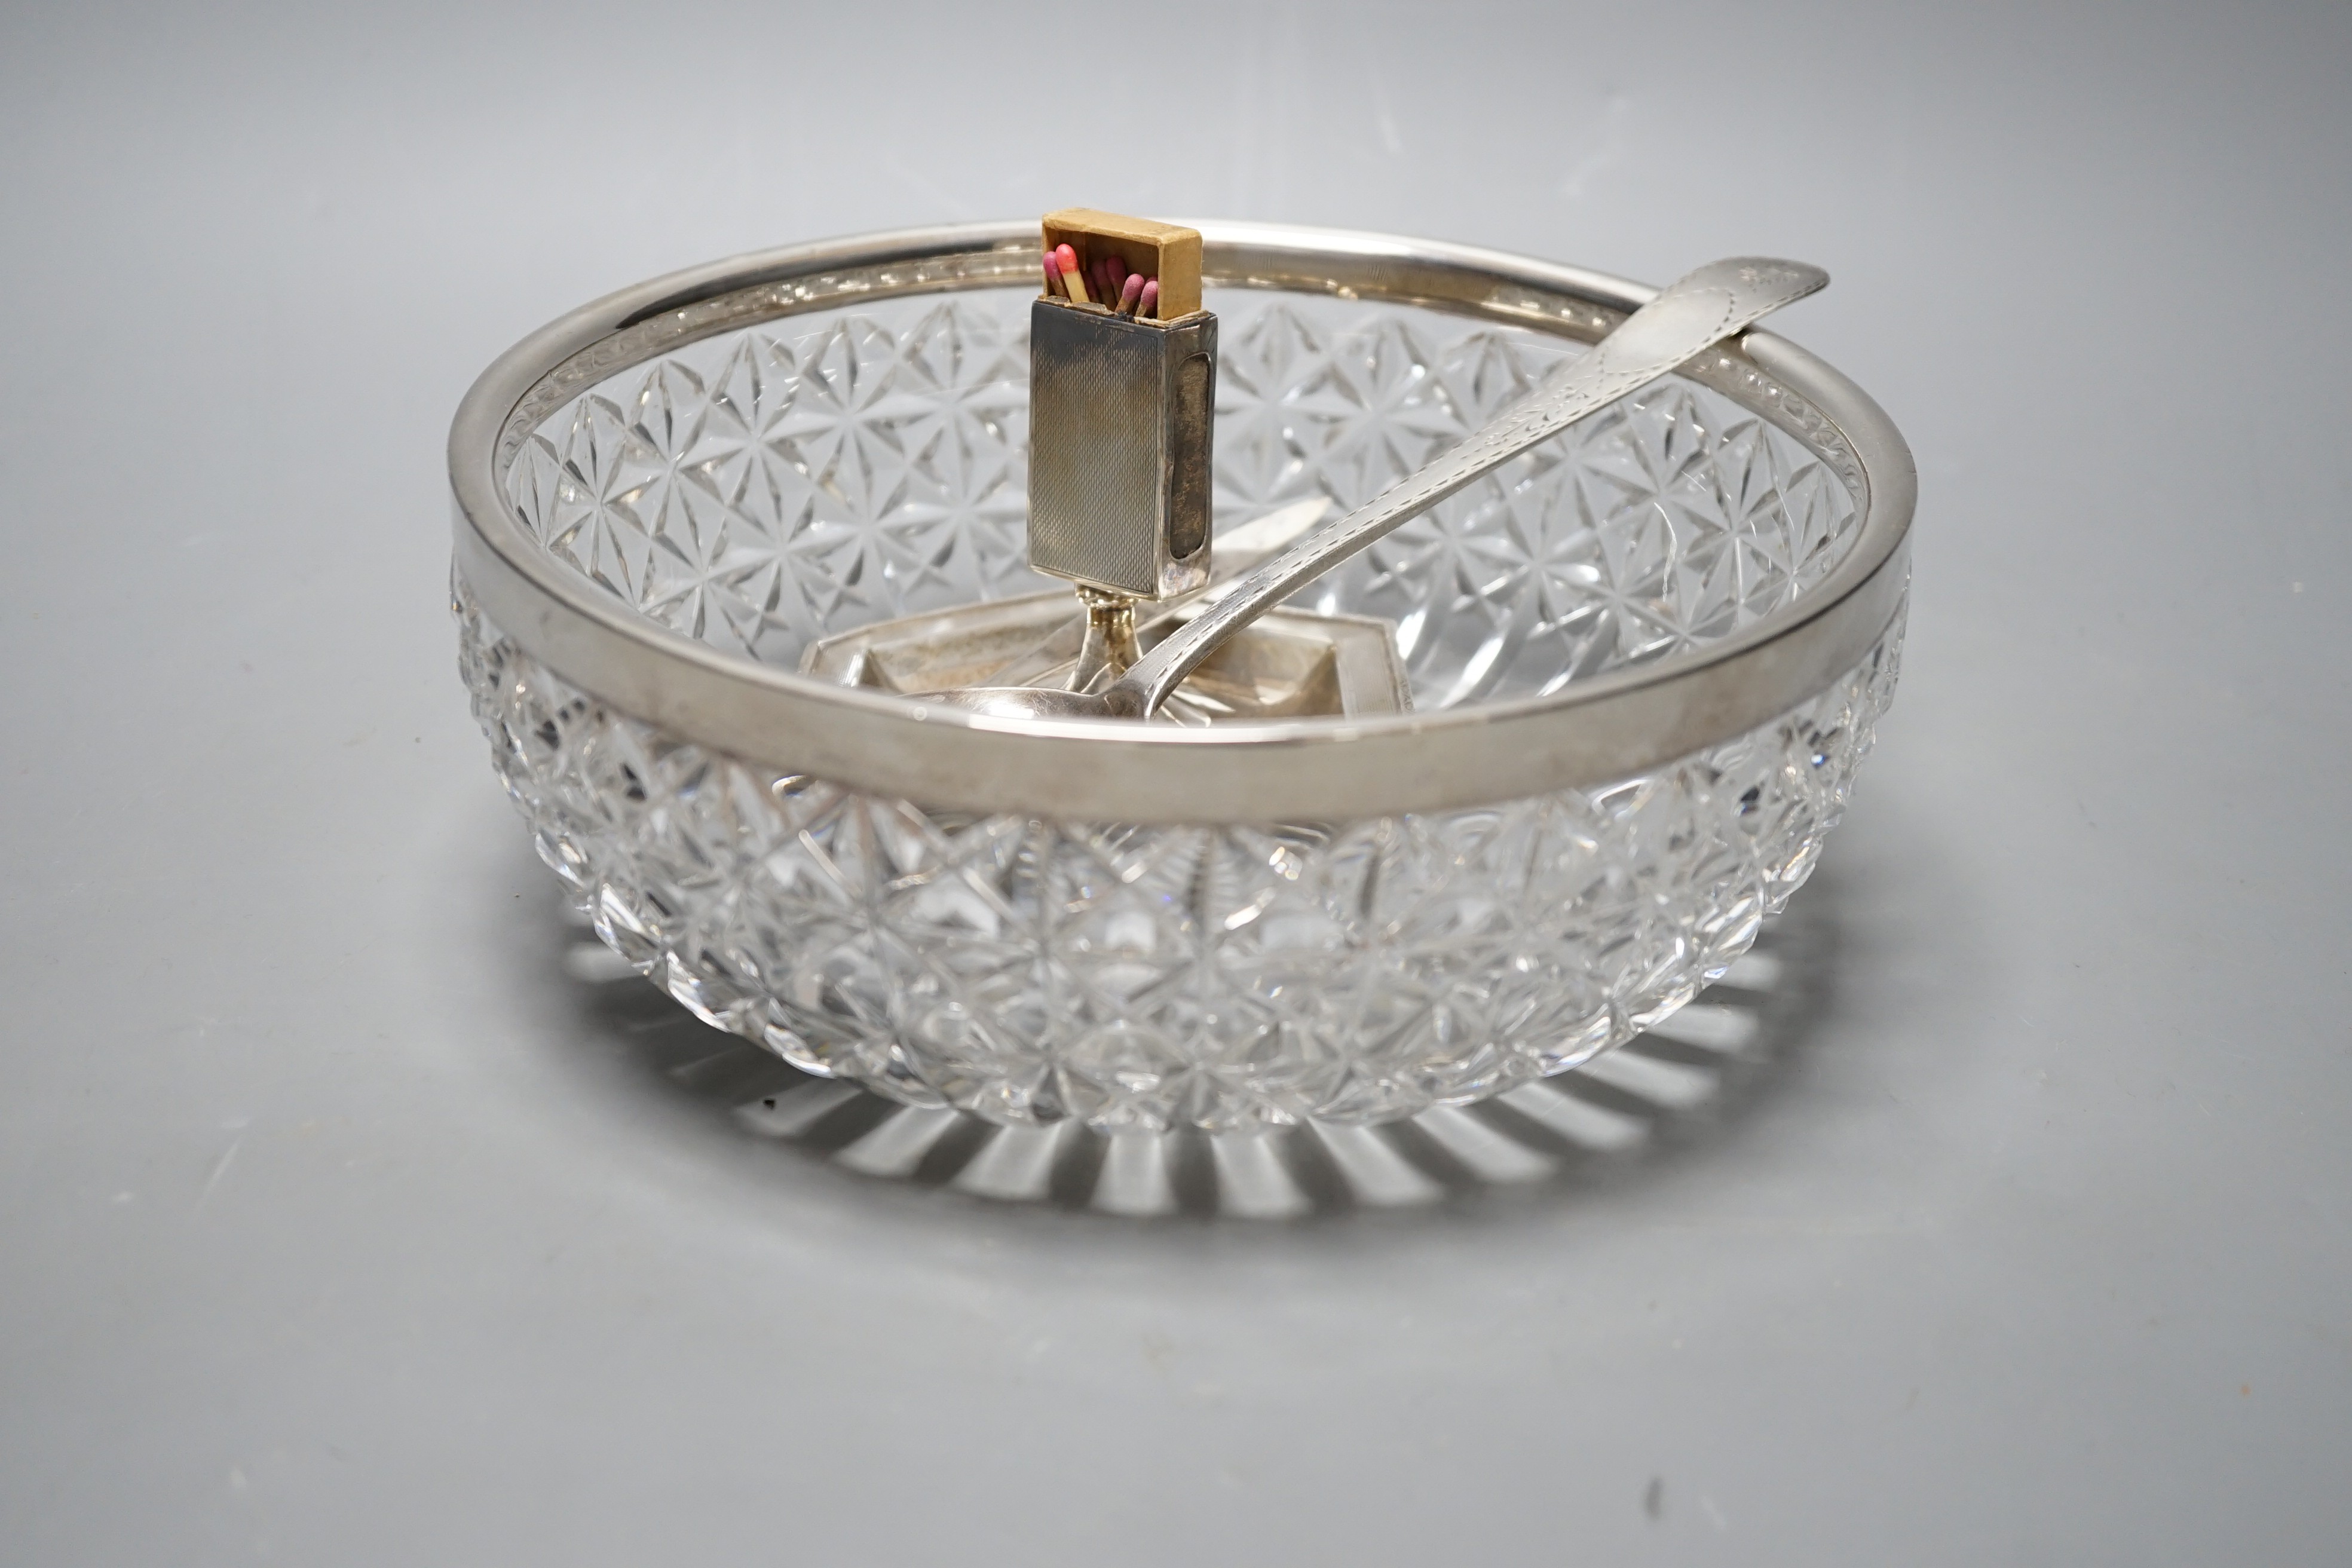 A George III Irish bright cut engraved silver tablespoon, Dublin, 1798, a silver match sleeve/ashtray, a silver rimmed fruit bowl fruit bowl and 925 letter opener.